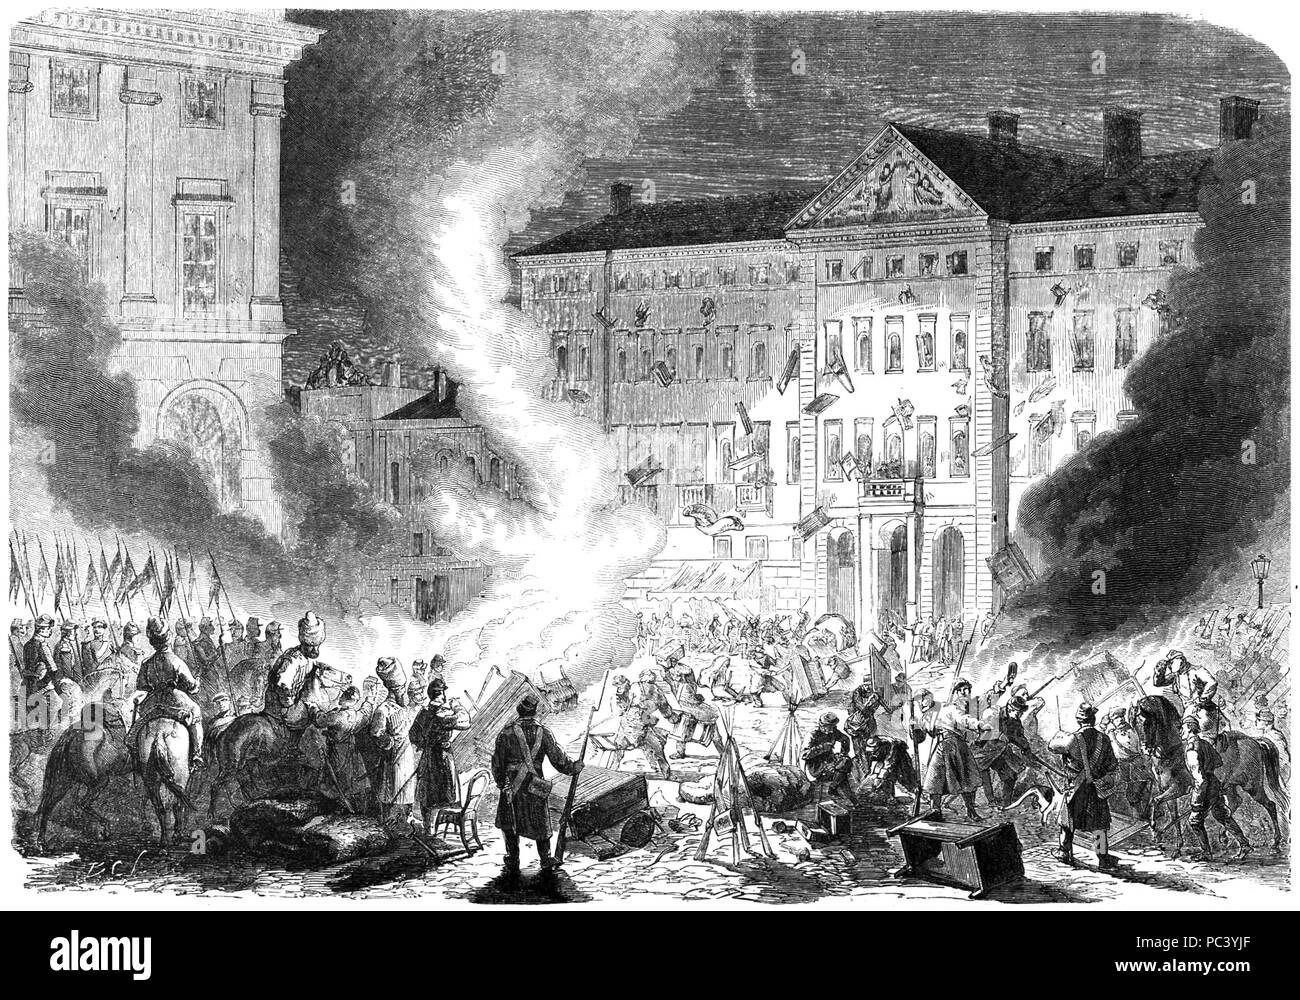 532 Russian Imperial Army demolishing Zamoyski Palace in Warsaw after assassination attempt 1863 Stock Photo